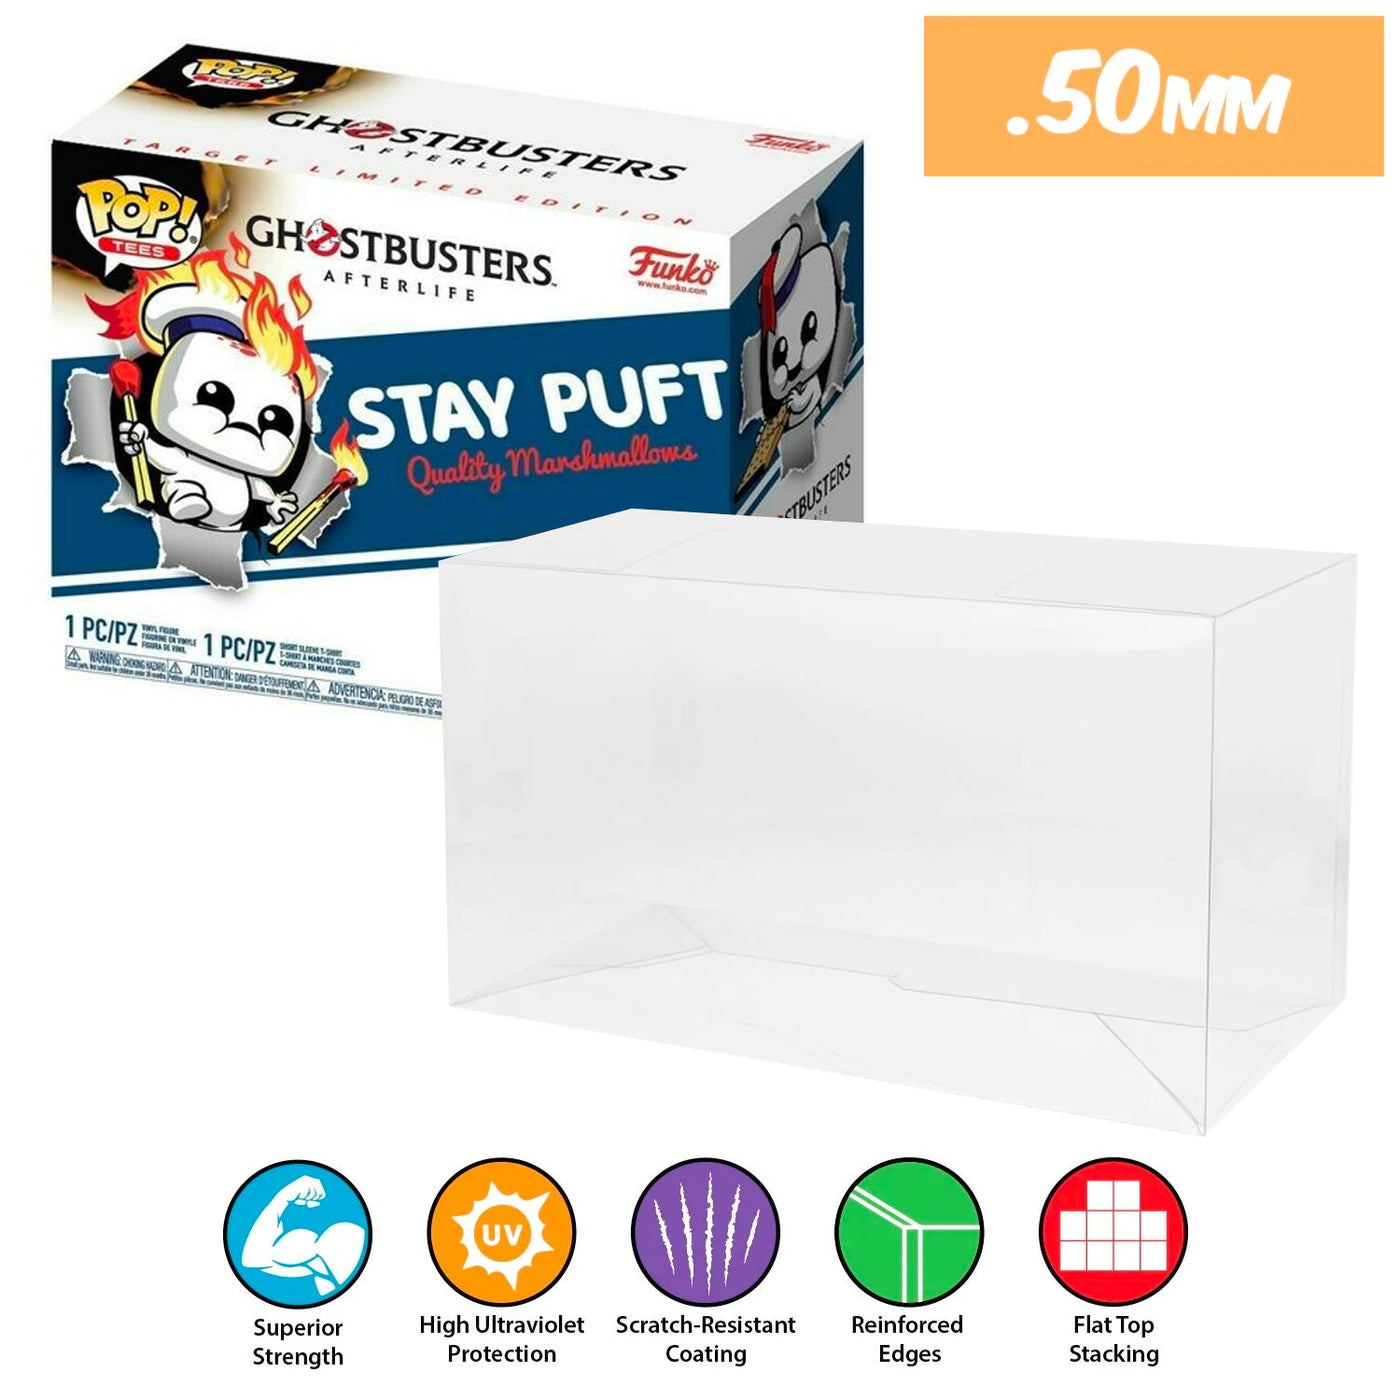 pop & tee ghostbusters mini stay puft burnt best funko pop protectors thick strong uv scratch flat top stack vinyl display geek plastic shield vaulted eco armor fits collect protect display case kollector protector